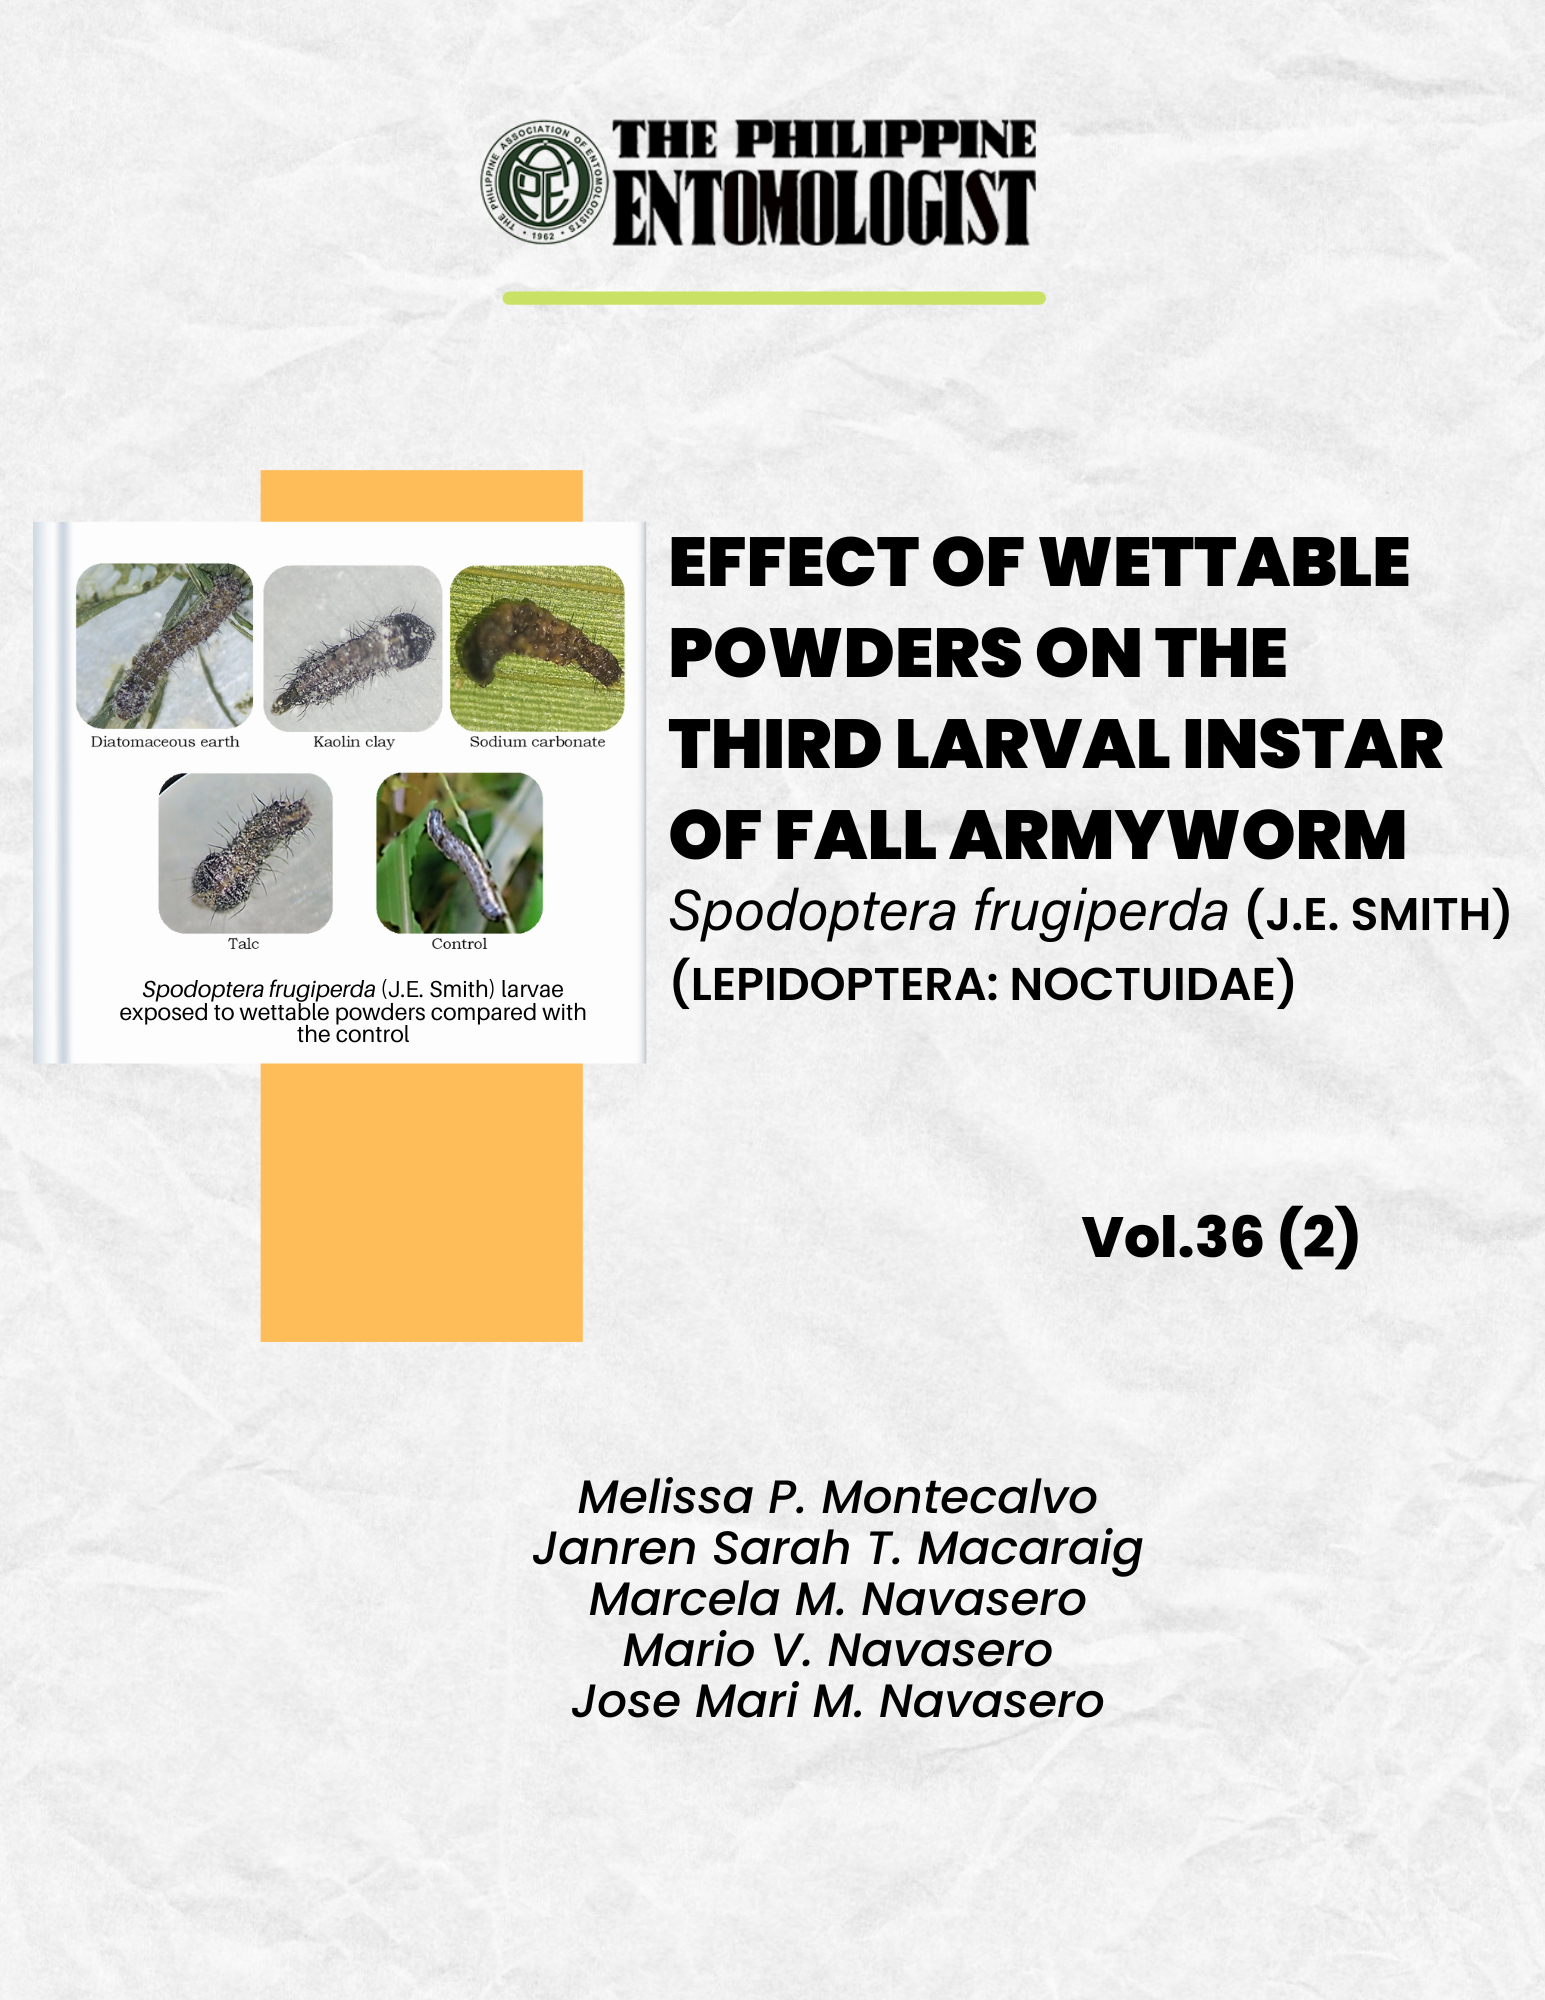 EFFECT OF WETTABLE POWDERS ON THE THIRD LARVAL INSTAR OF FALL ARMYWORM Spodoptera frugiperda (J.E. SMITH) (LEPIDOPTERA: NOCTUIDAE)